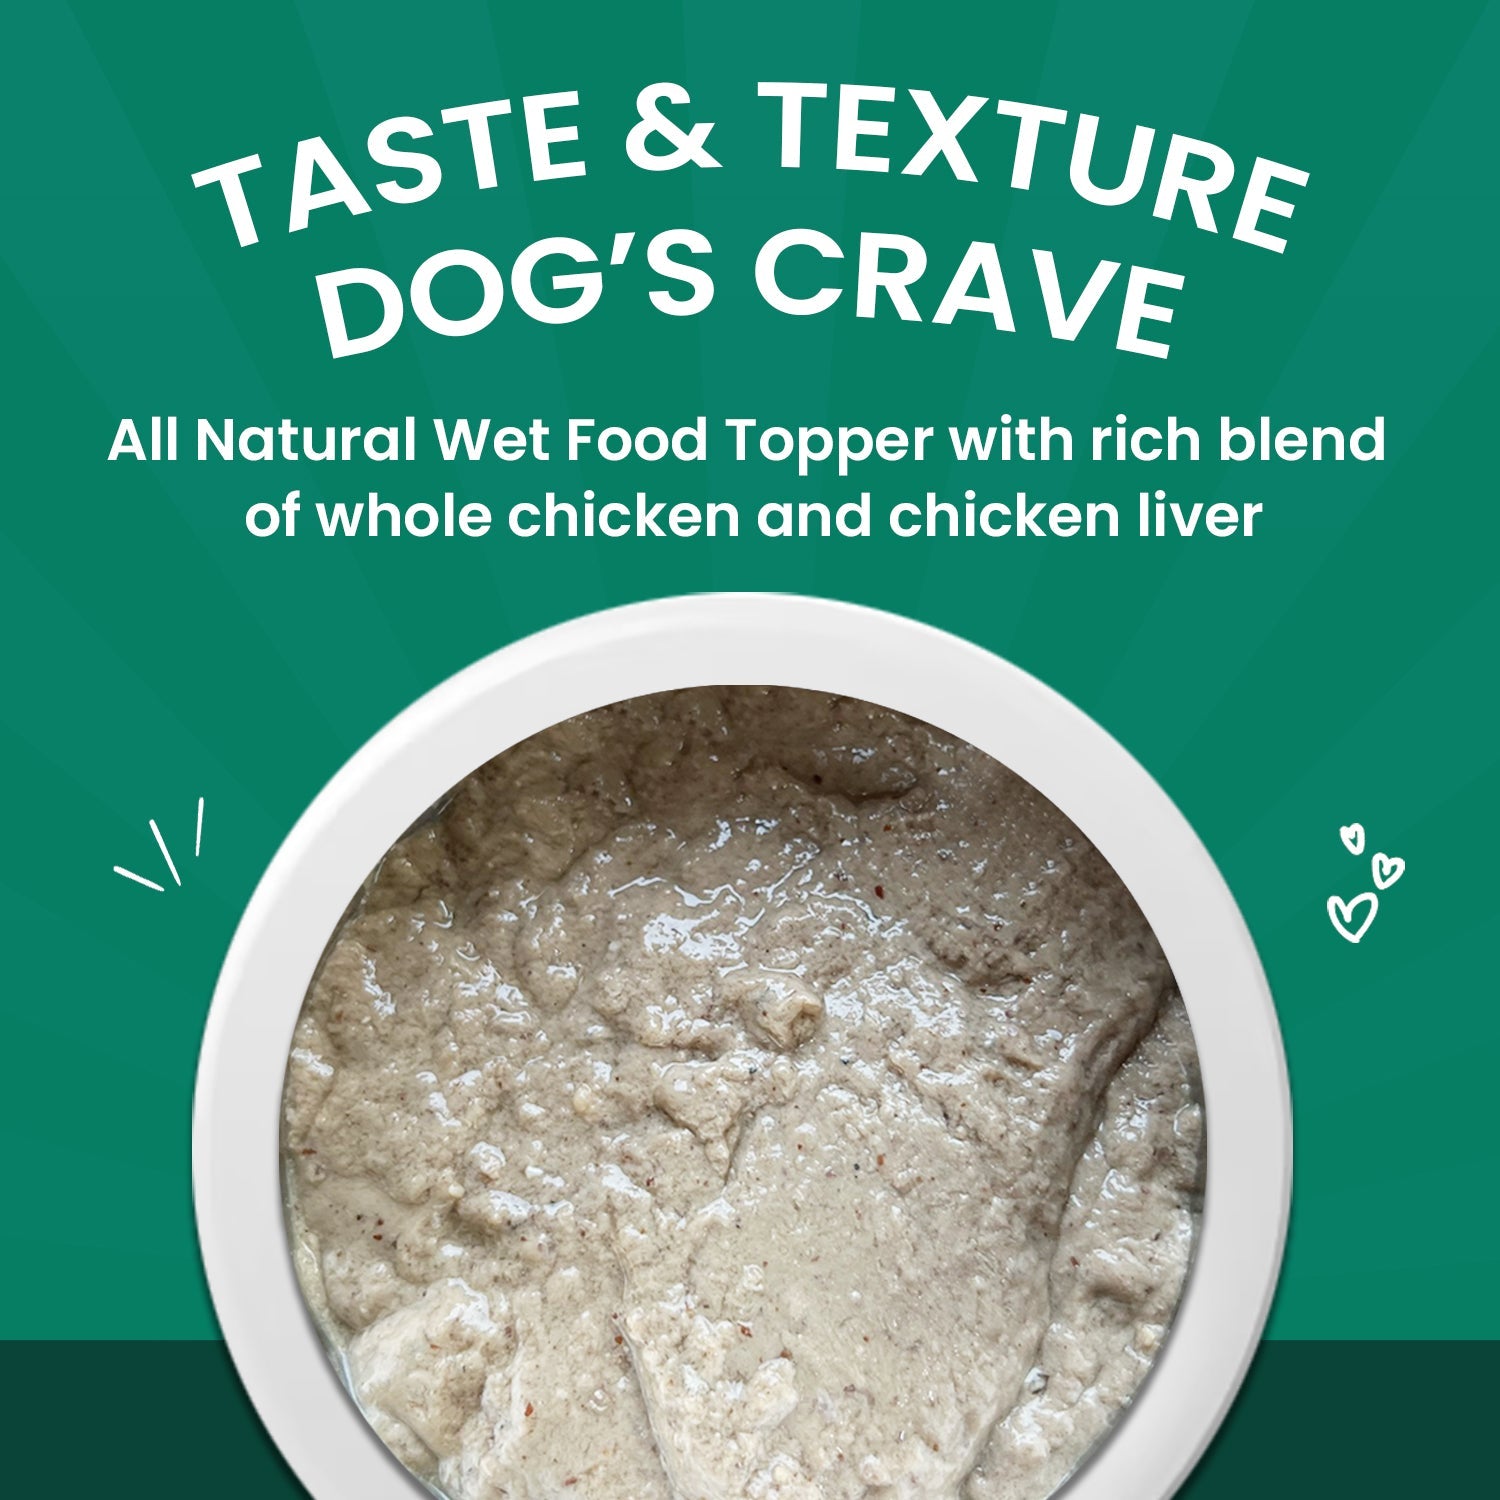 Chicken Superfood Meal Topper with Chicken Bone Broth Combo Pack for Dogs